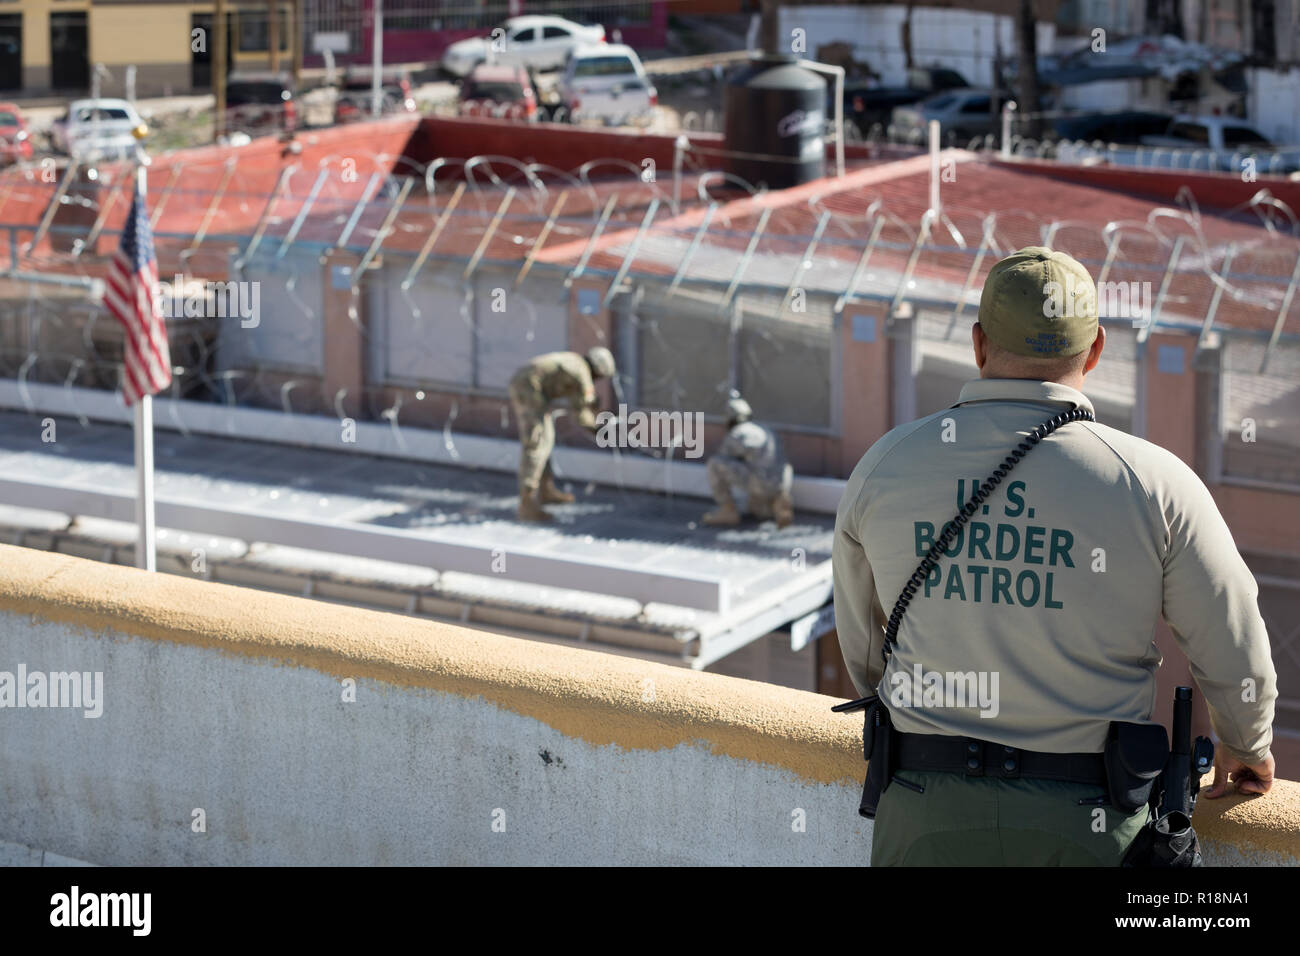 A U.S. Border Patrol Agent watches as soldiers from the U.S. Army 36th Engineer Brigade install concertina wire at the Morley Gate Pedestrian Port November 7, 2018 in Nogales, Arizona. The troops are deploying to the U.S. - Mexico border by order of President Donald Trump to intercept the Honduran migrant caravan. Stock Photo